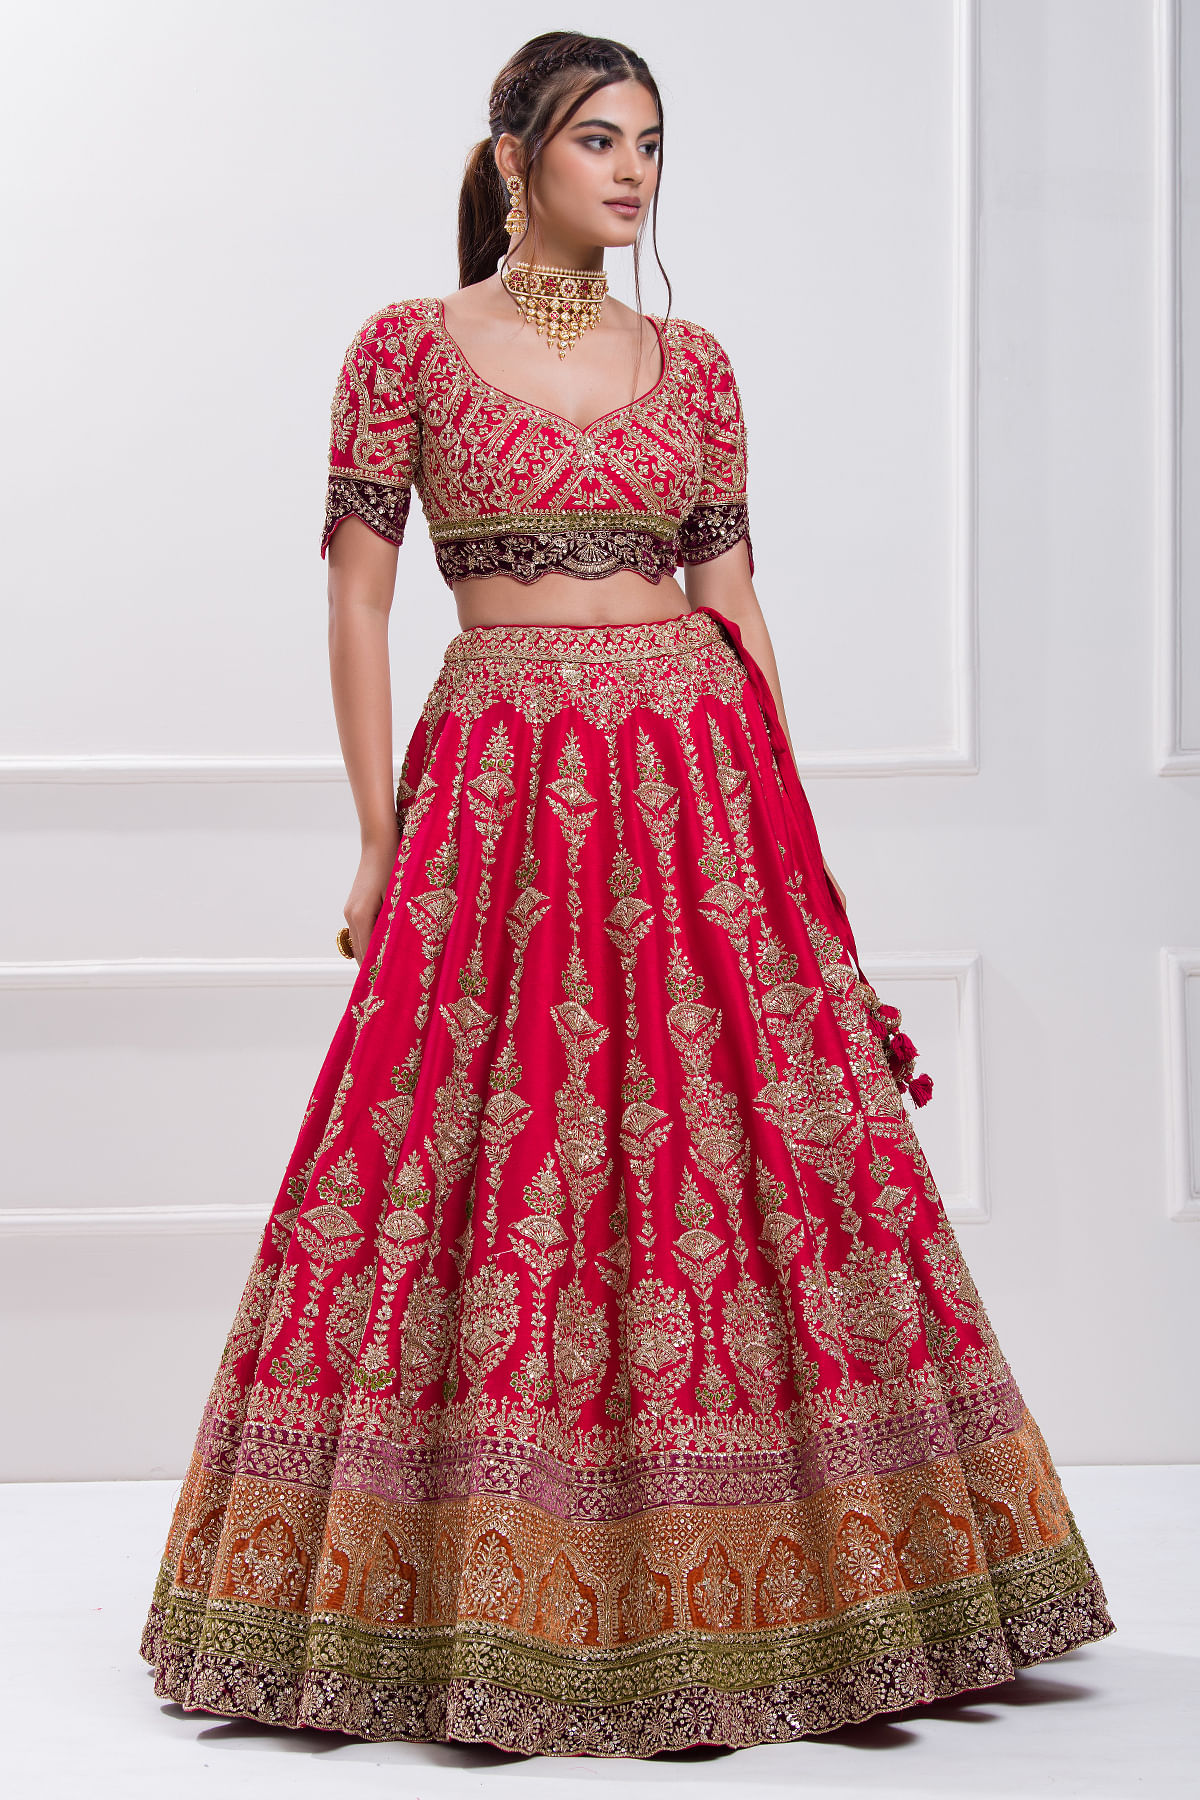 A Rani pink lehenga is a bold and beautiful choice for any special